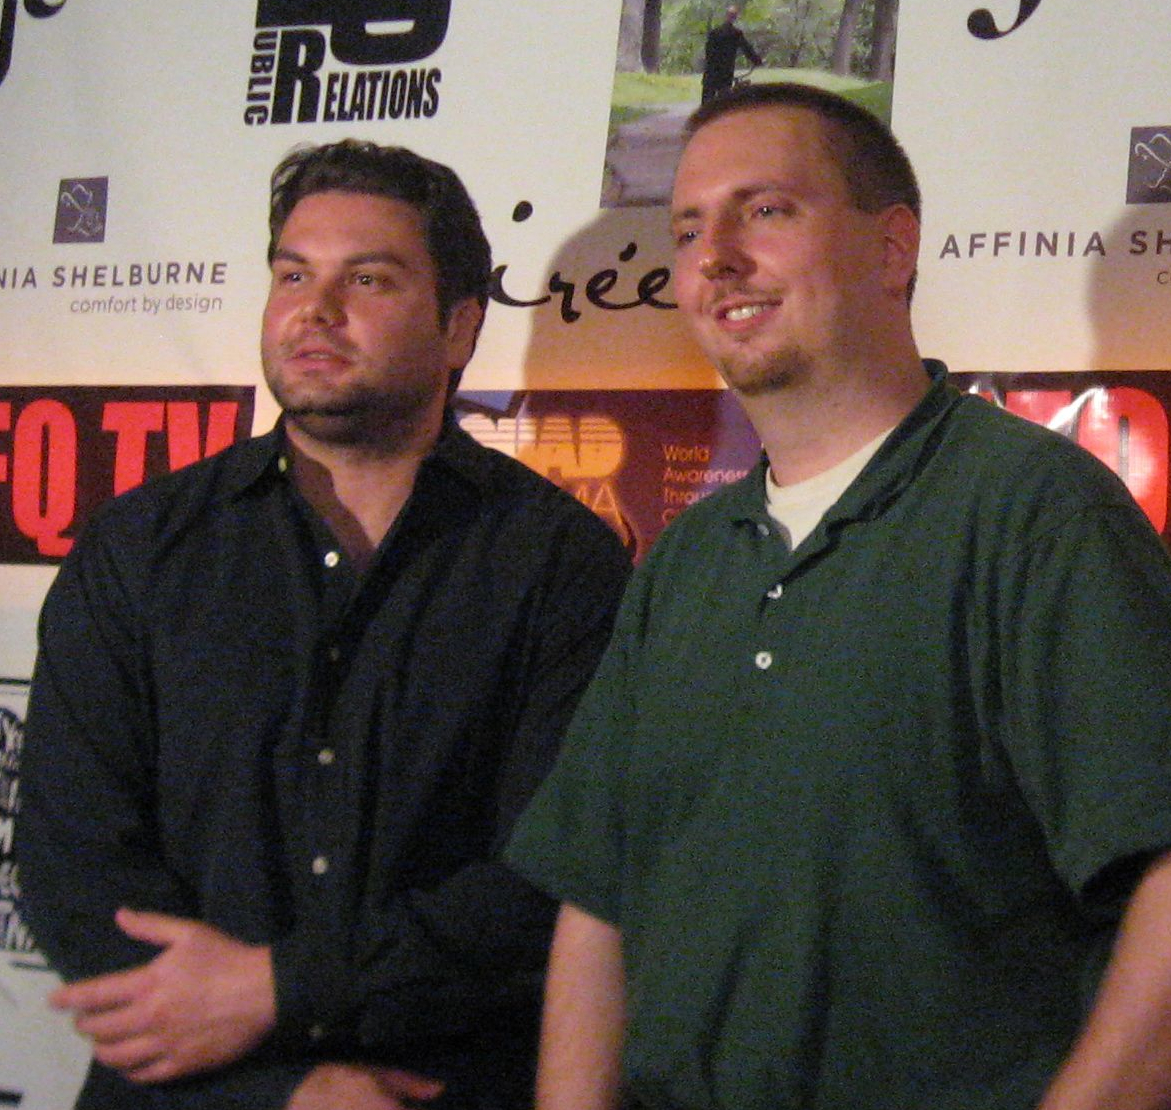 (From left to right) Dan Gregory & Blake J. Zawadzki at the 2011 New York International Independent Film & Video Festival.